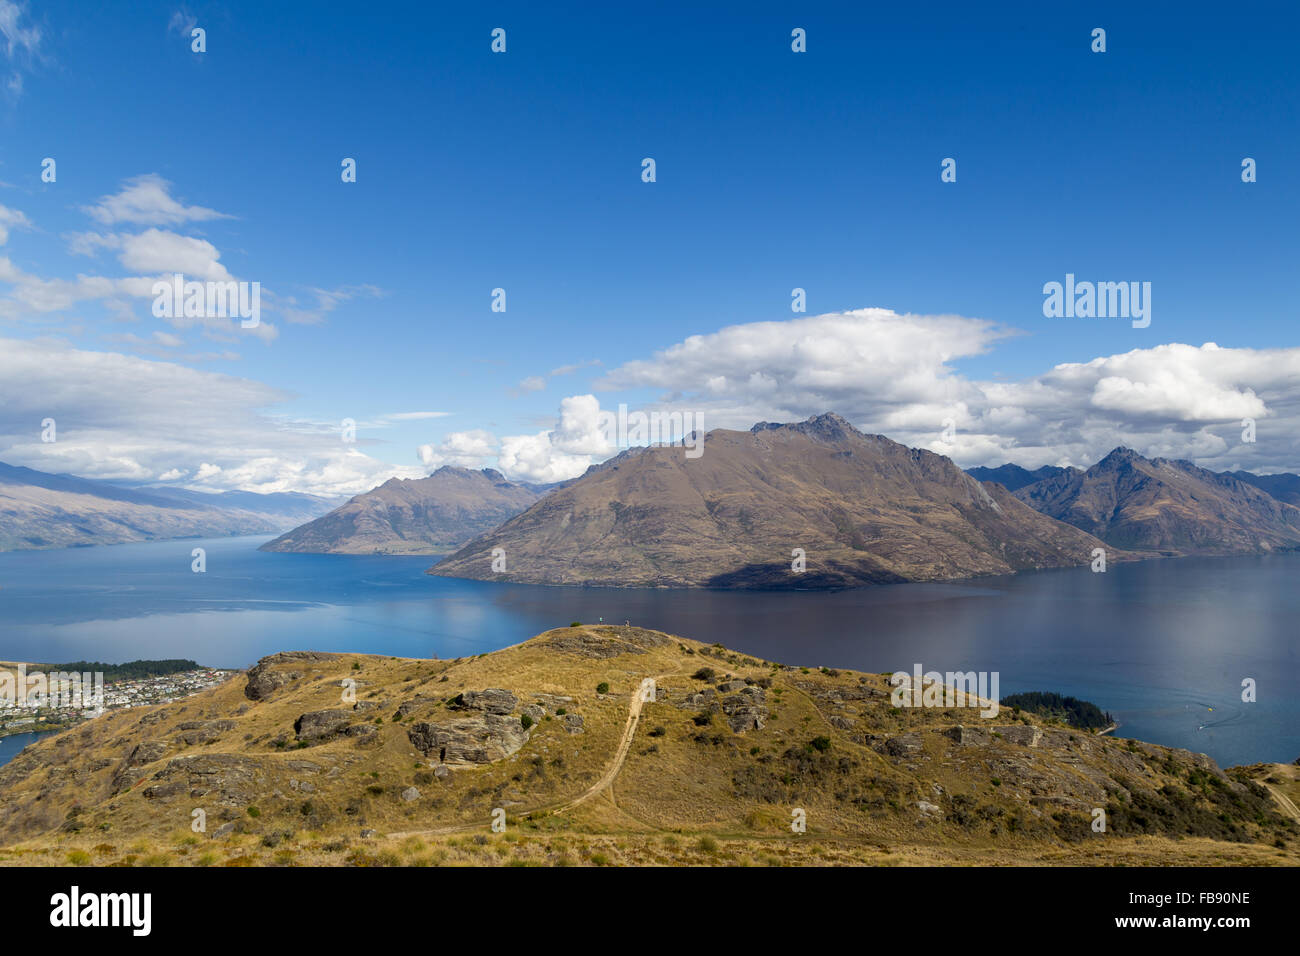 View of the mountains and Lake Wakatipu from Queenstown Hill, New Zealand. Stock Photo